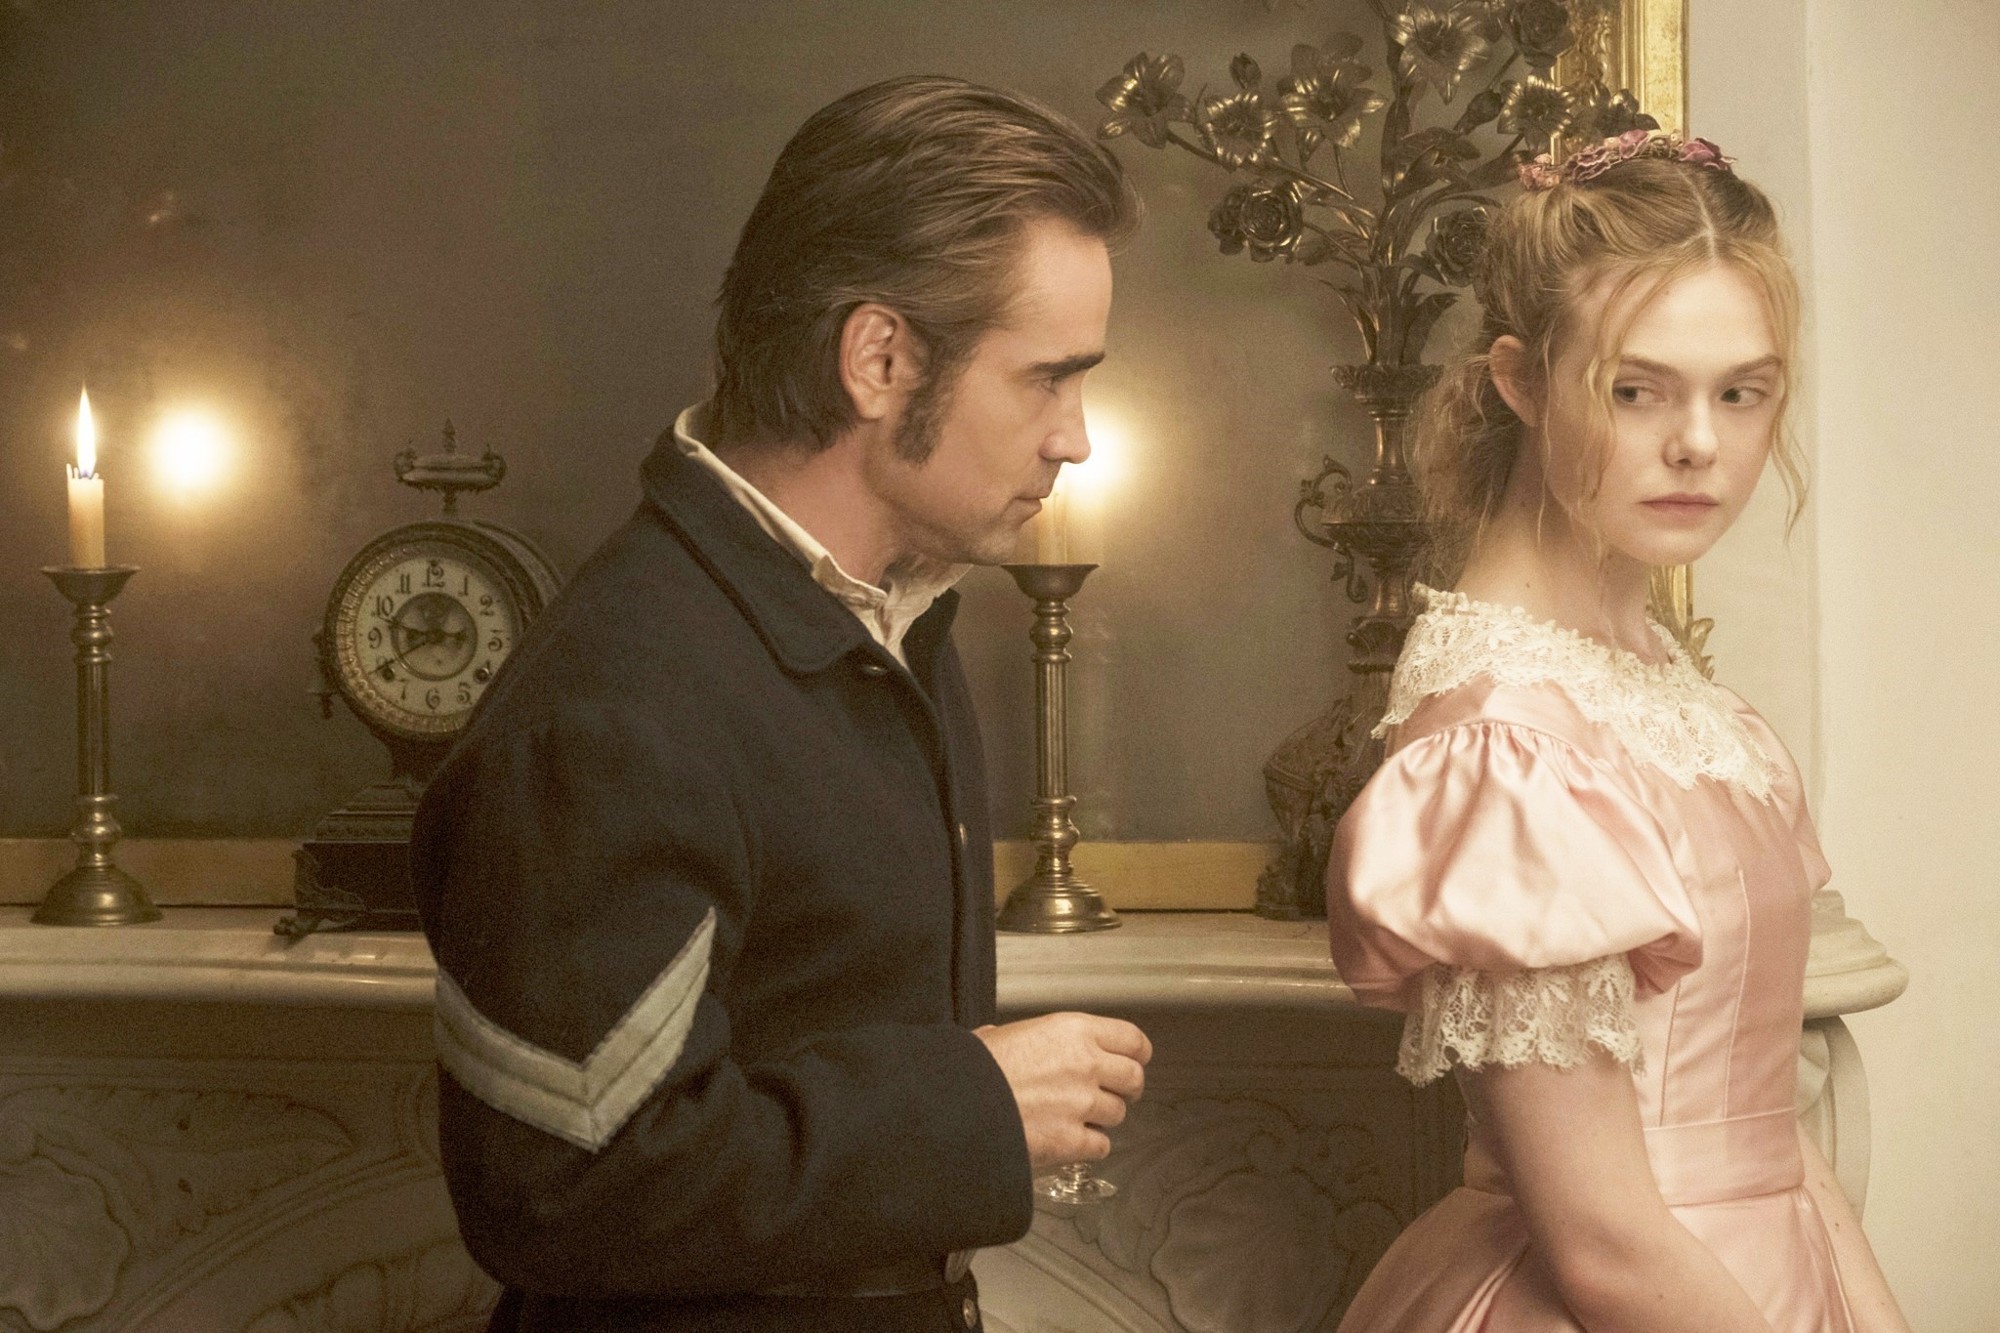 Colin Farrell stars as John McBurney and Elle Fanning stars as Alicia in Focus Features' The Beguiled (2017)